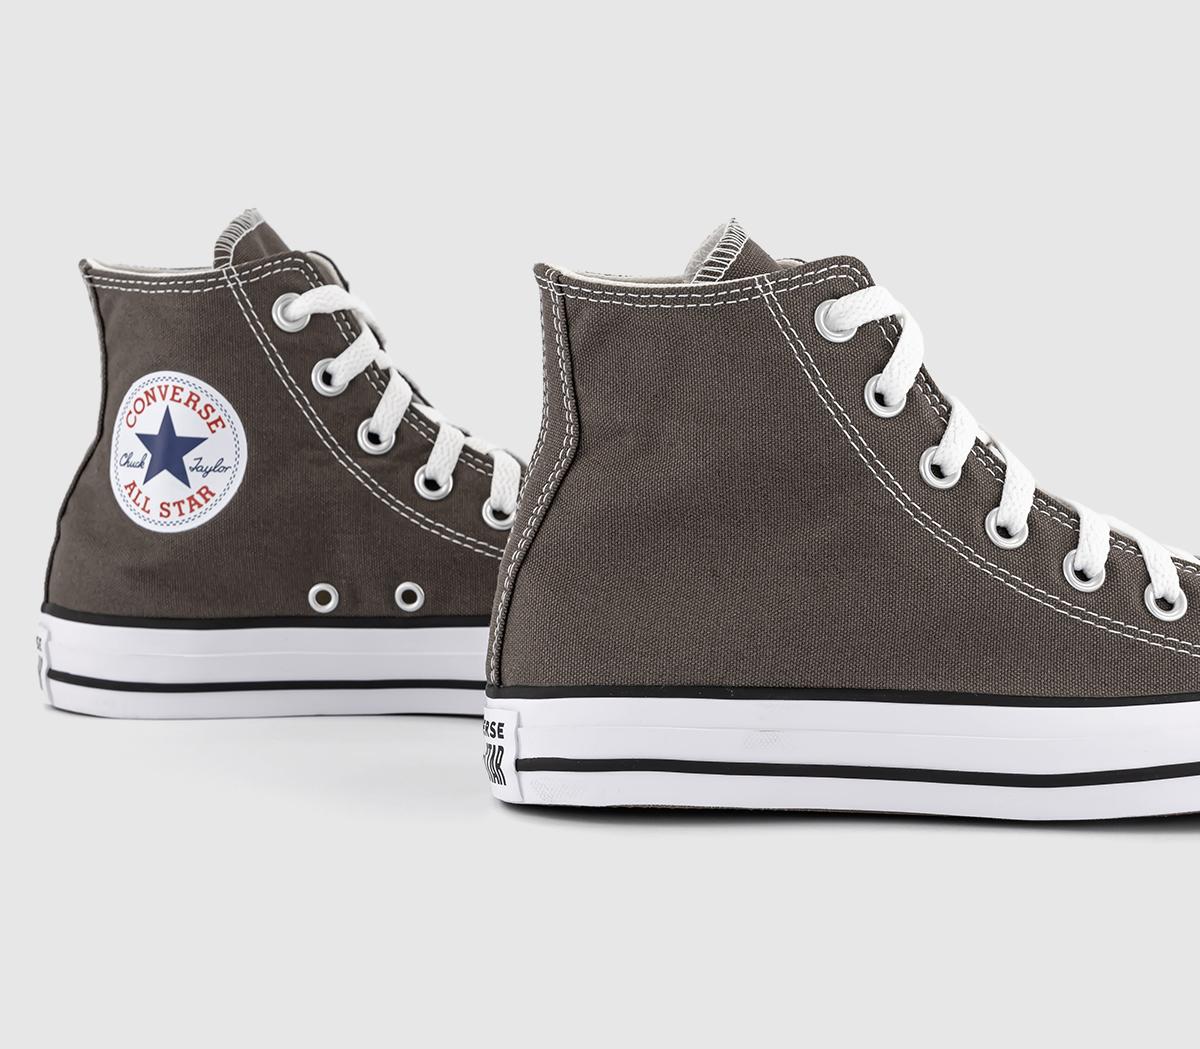 Converse All Star Hi Trainers Charcoal - Unisex Sports